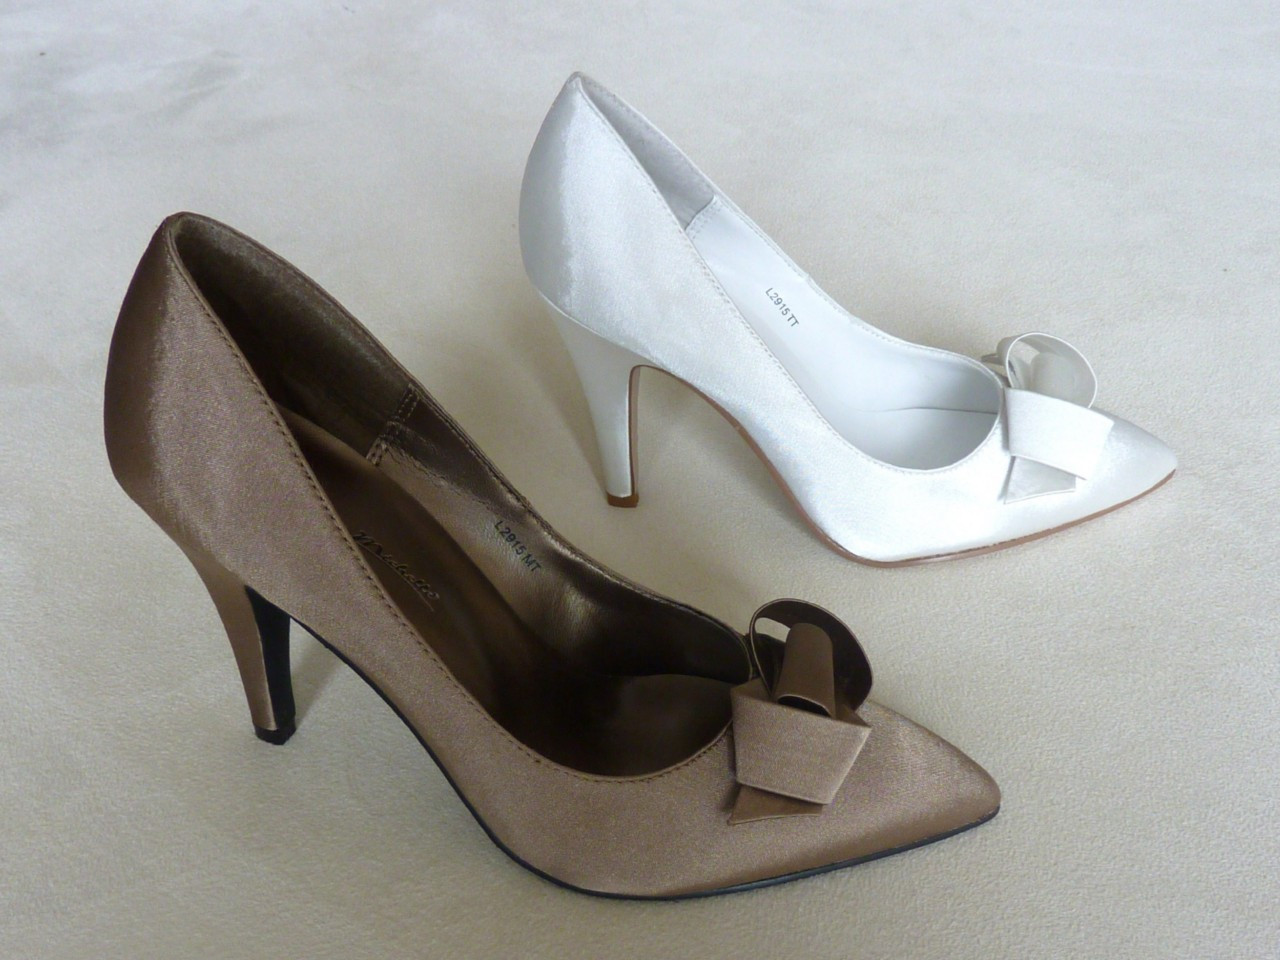 Taupe Shoes For Wedding
 NEW SATIN BOW WEDDING BRIDAL SHOES WHITE OR TAUPE